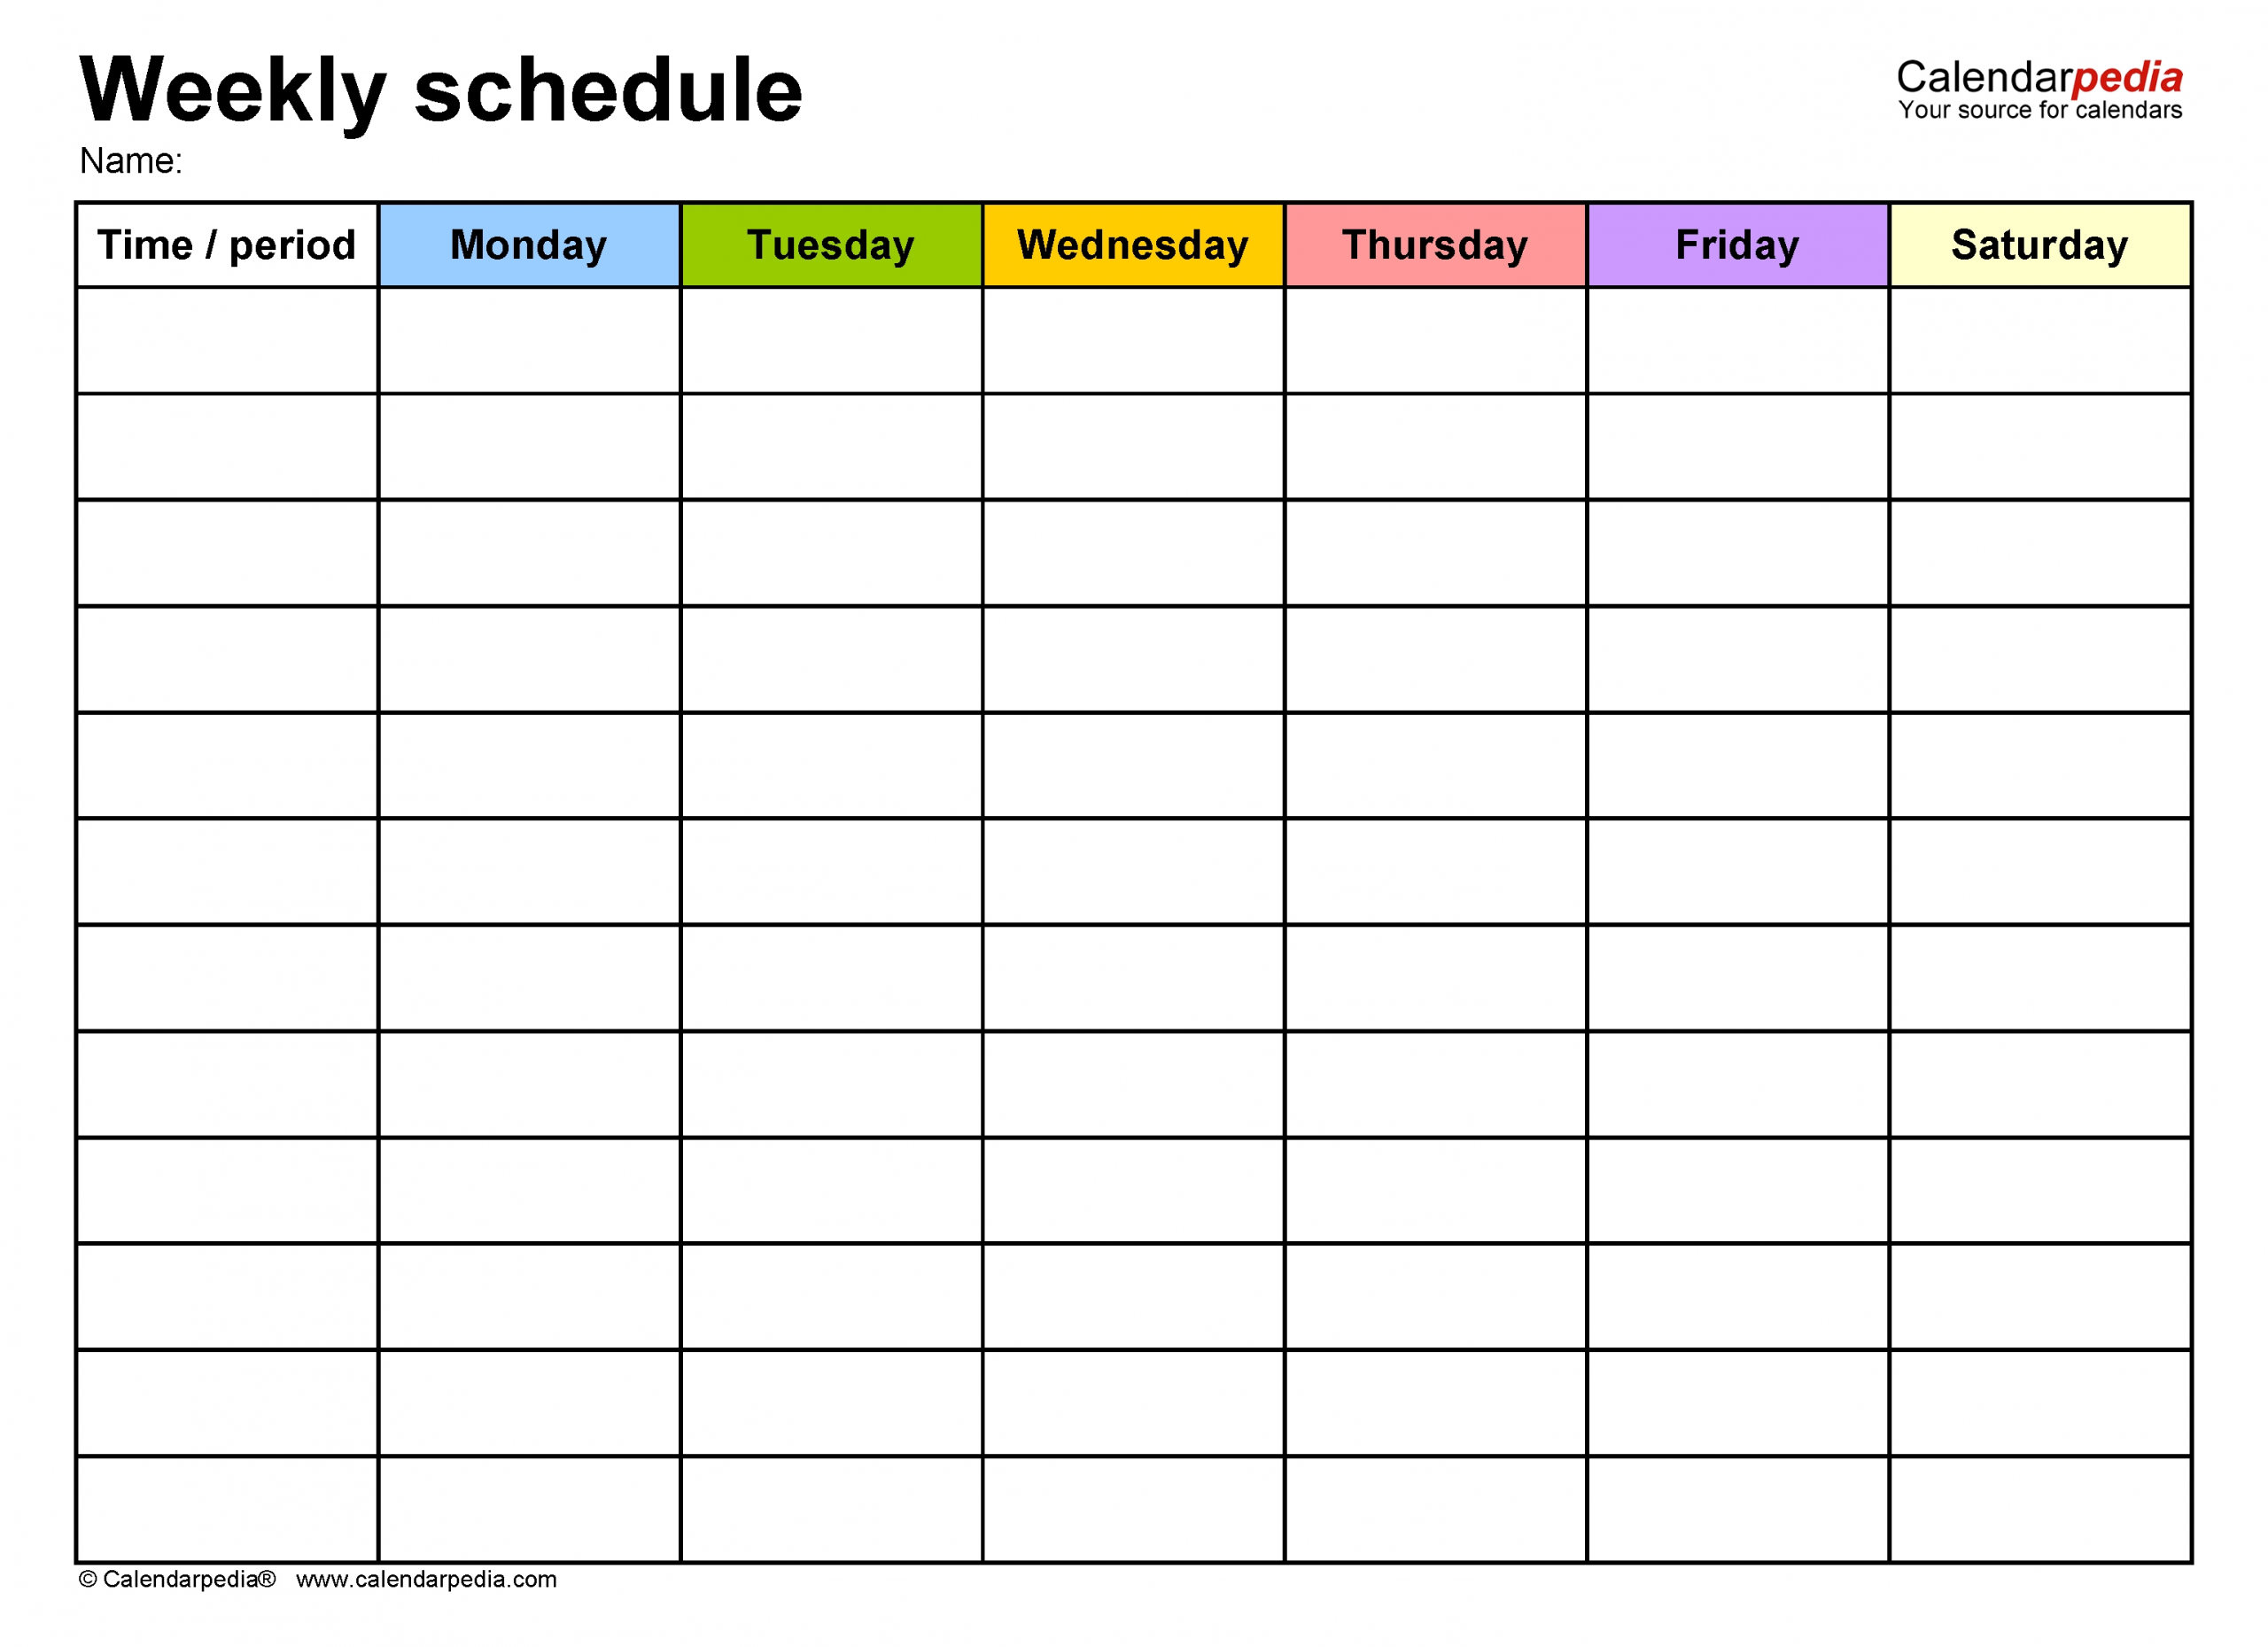 Free Weekly Schedule Templates For Word - 18 Templates within Daily Schedule Printable Template Classroom